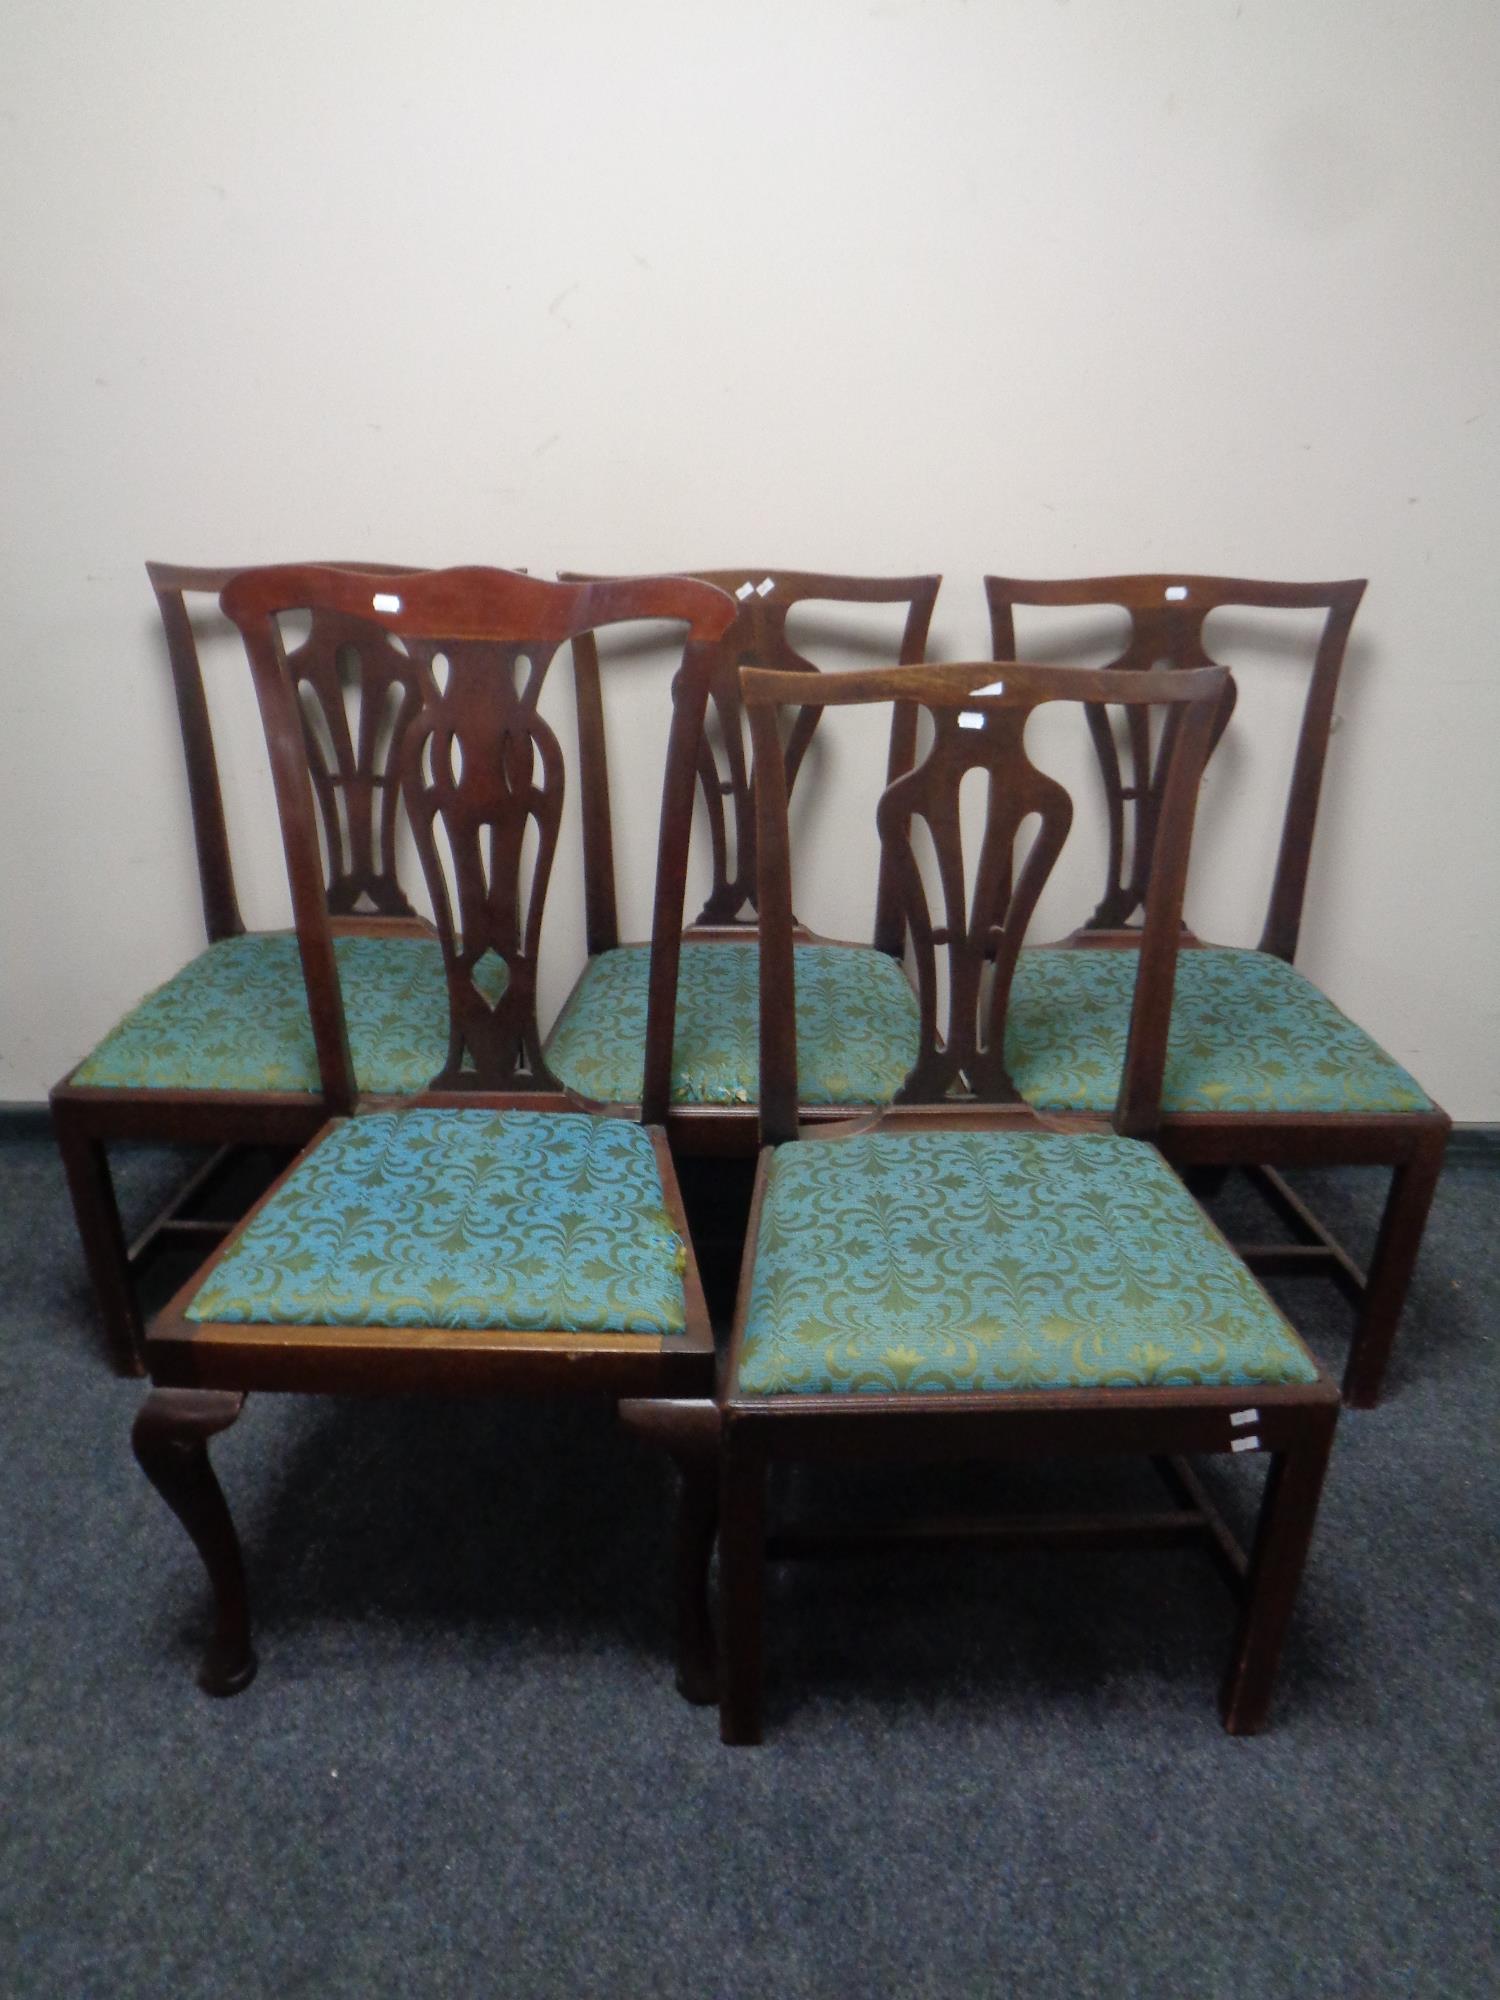 A set of four antique Chippendale style dining chairs together with one other similar chair